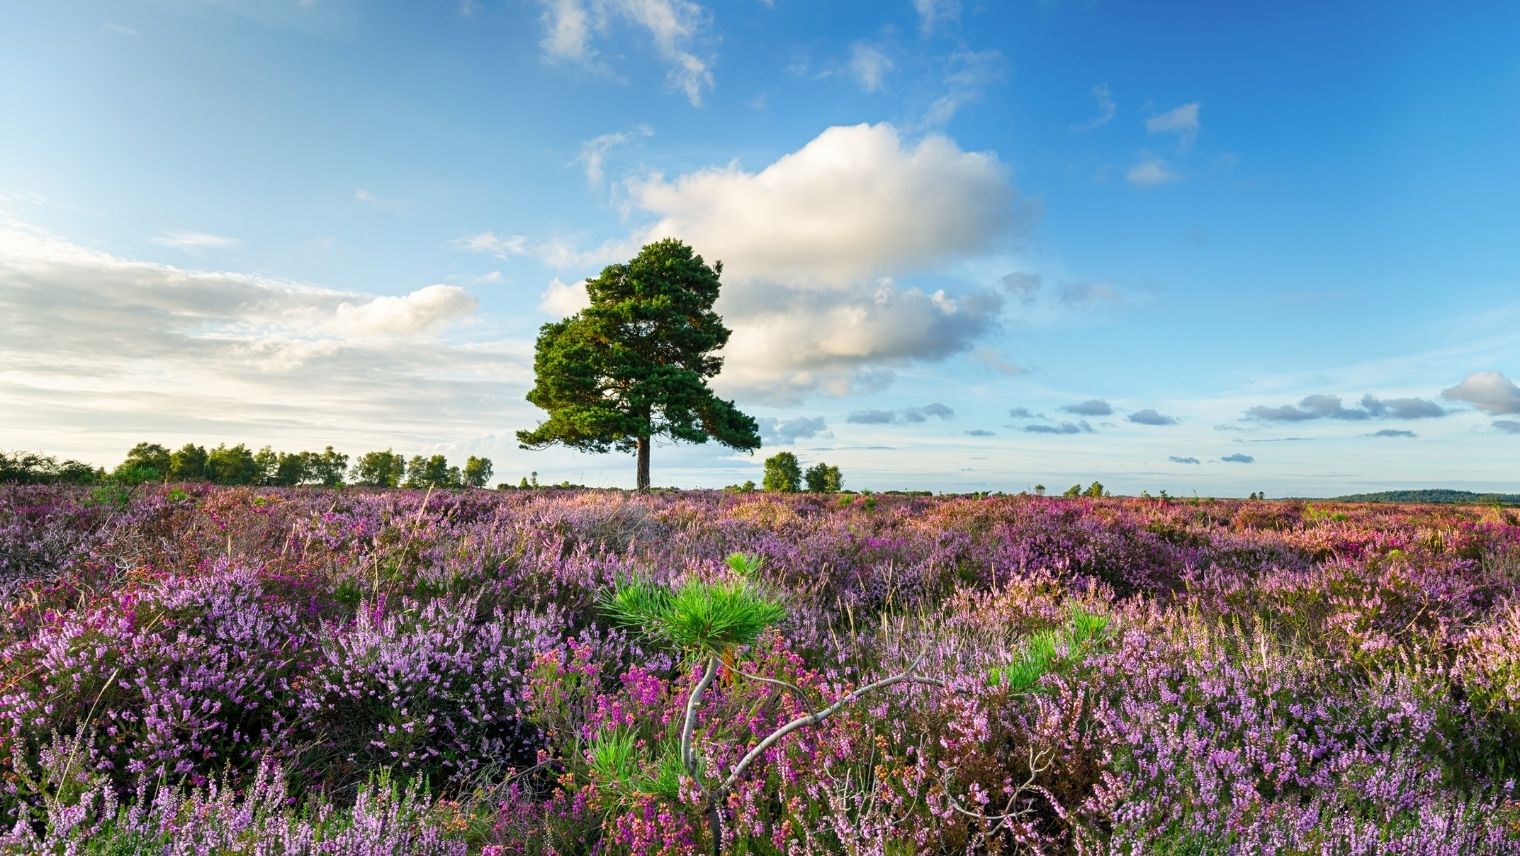 A tree standing in a field of heather in the New Forest